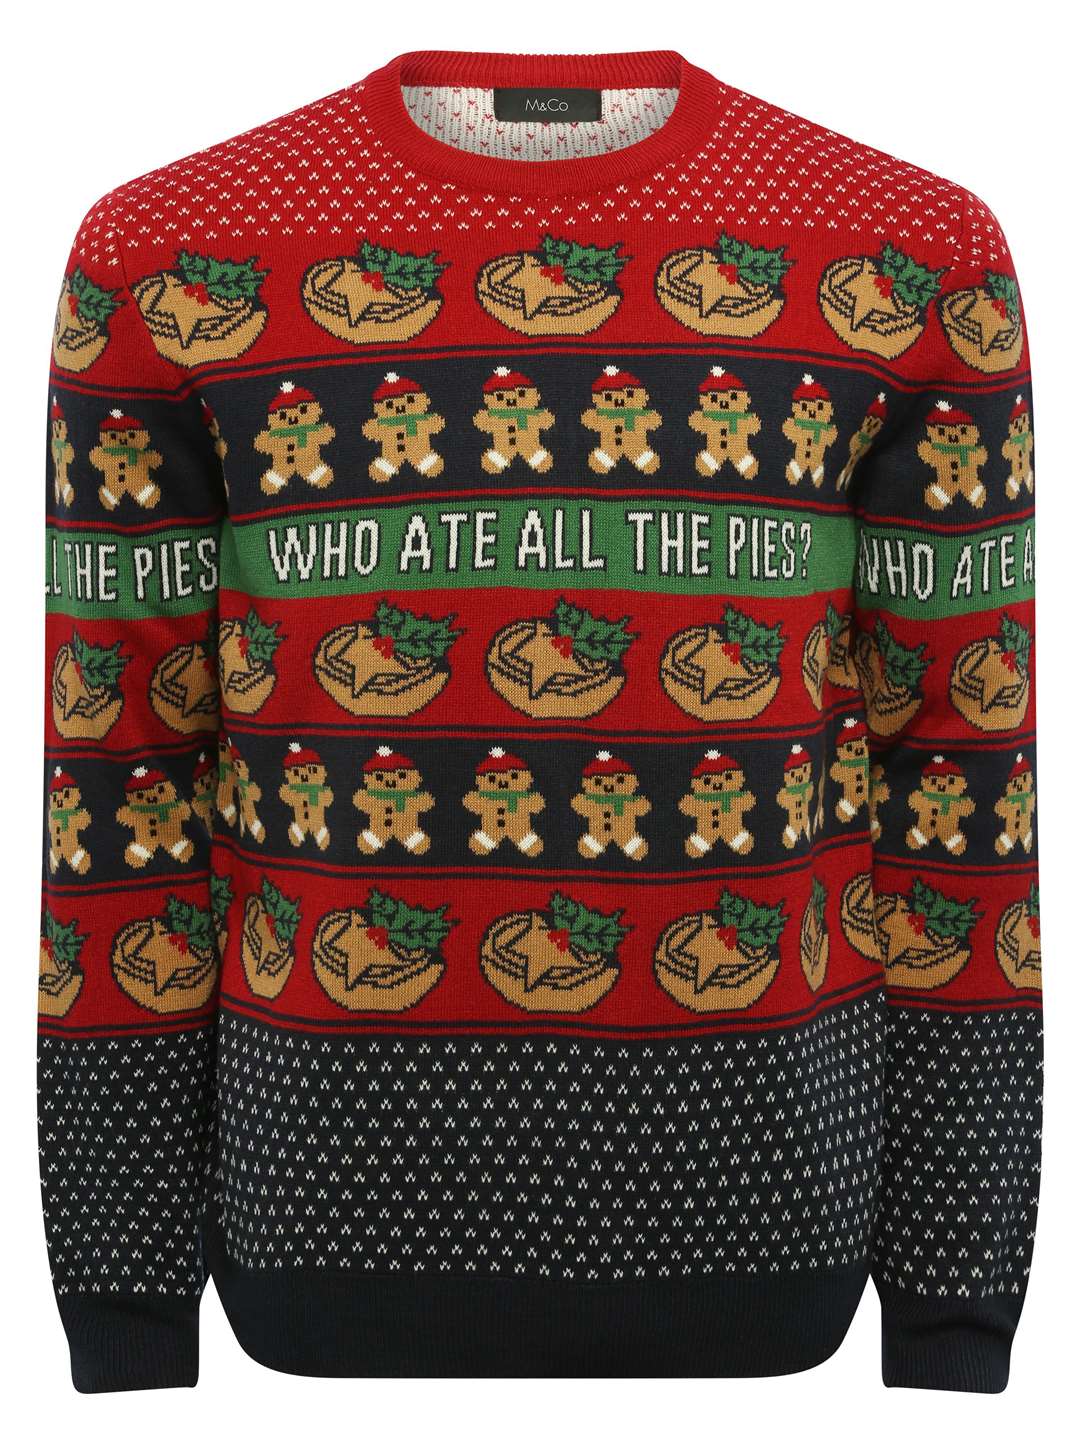 Who Ate All The Pies Christmas Jumper, £24.99 from M&Co